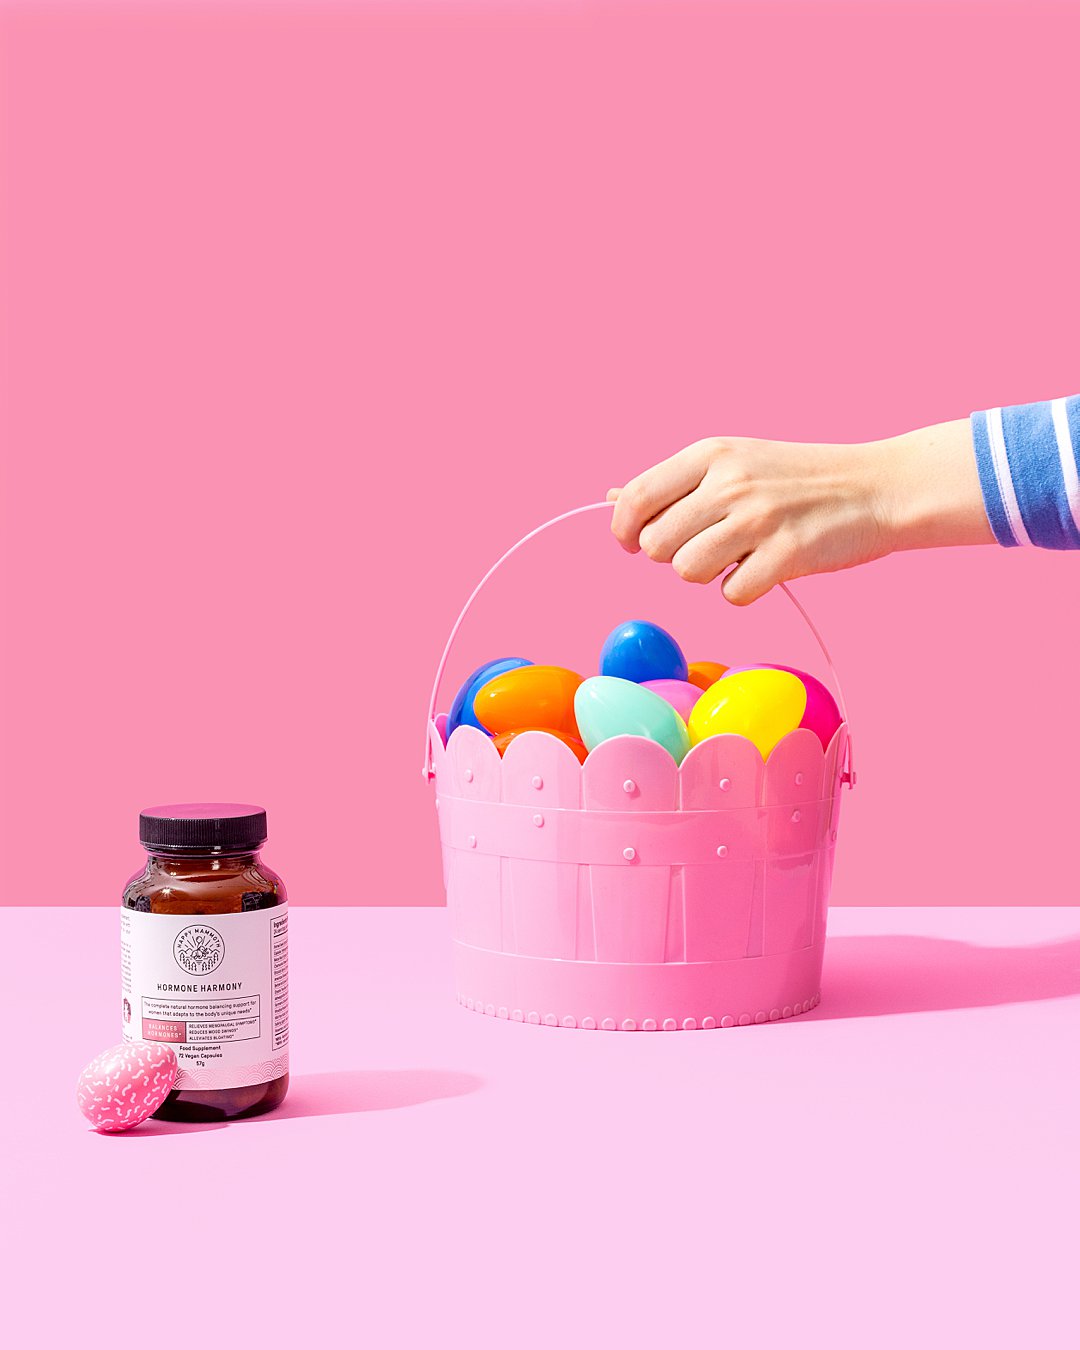 Colourful commercial photography for Happy Mammoth supplements. Styled health supplement product still life photography by HIYA MARIANNE photo production studio.